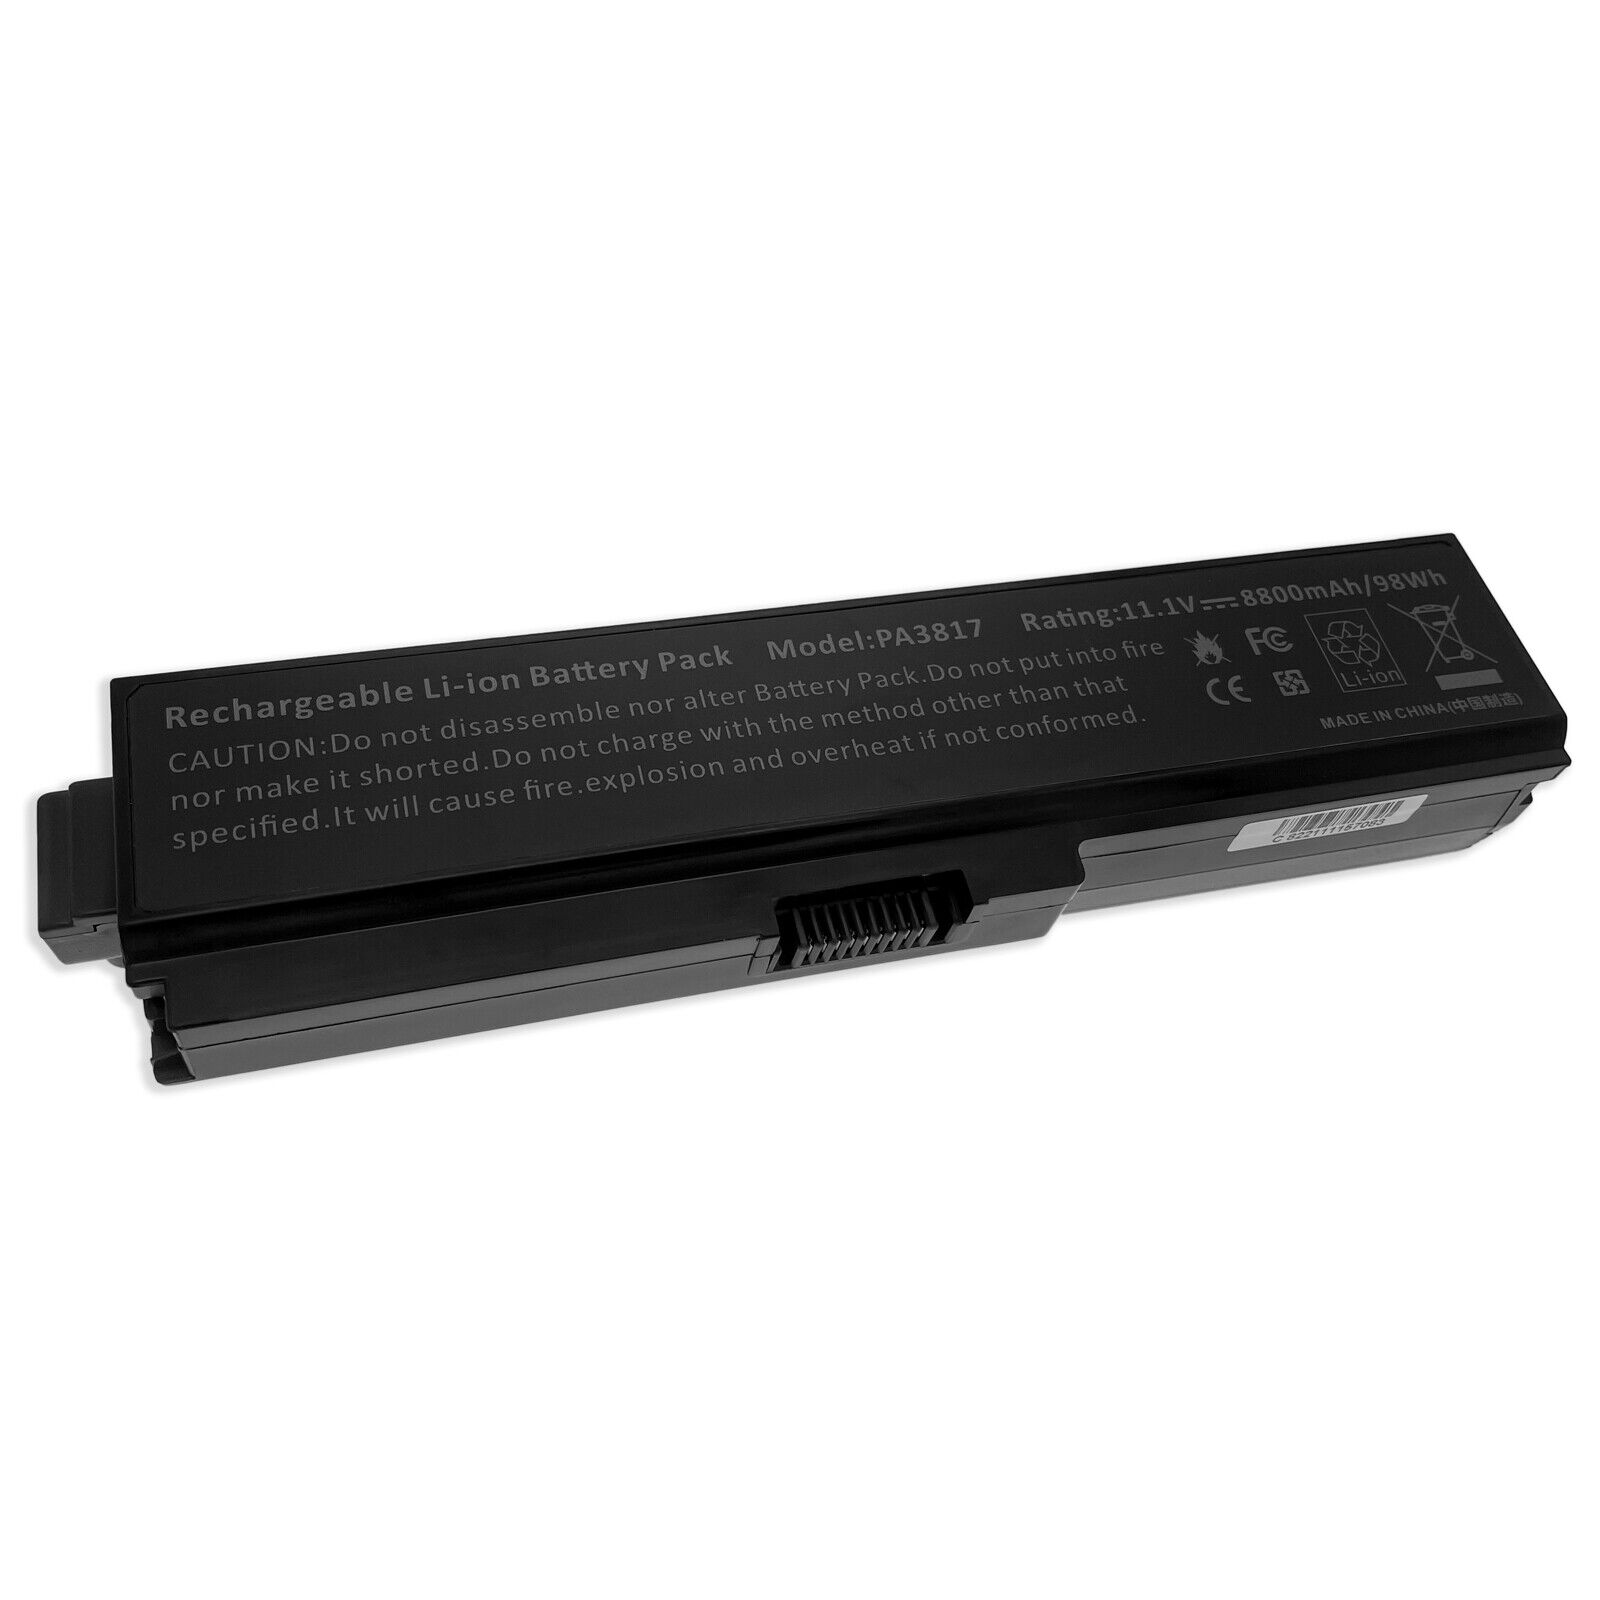 12 Cell Battery for Toshiba Satellite A660 A660D A665 A665D Laptop PA3817U-1BRS